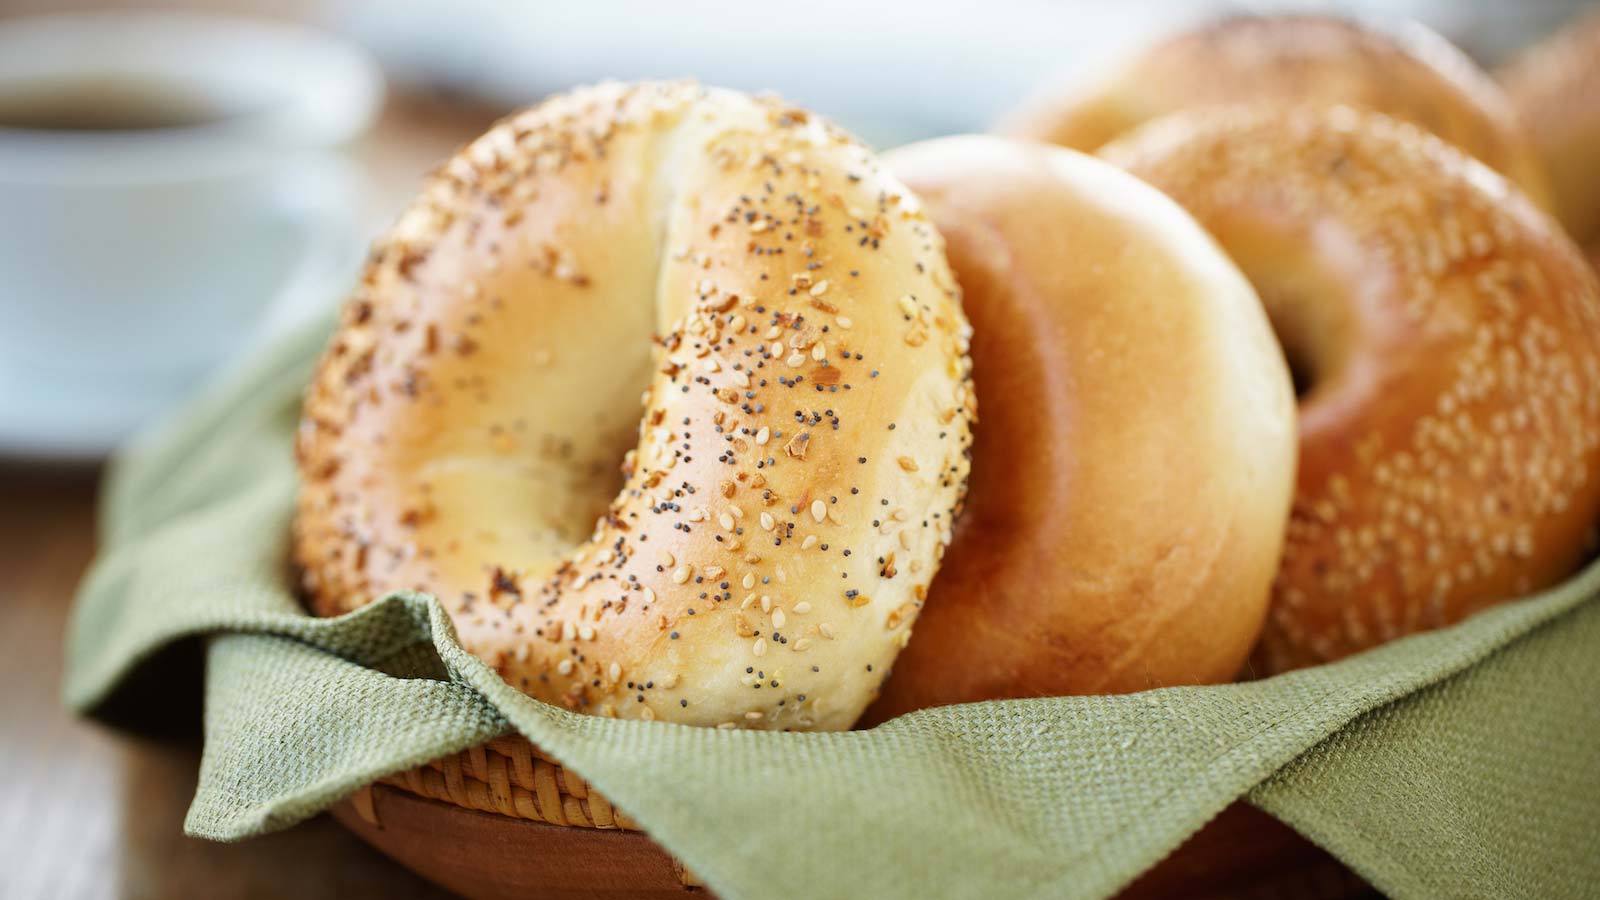 🥖 How Many Baked Goods Have You Tried from Around the World? Bagels